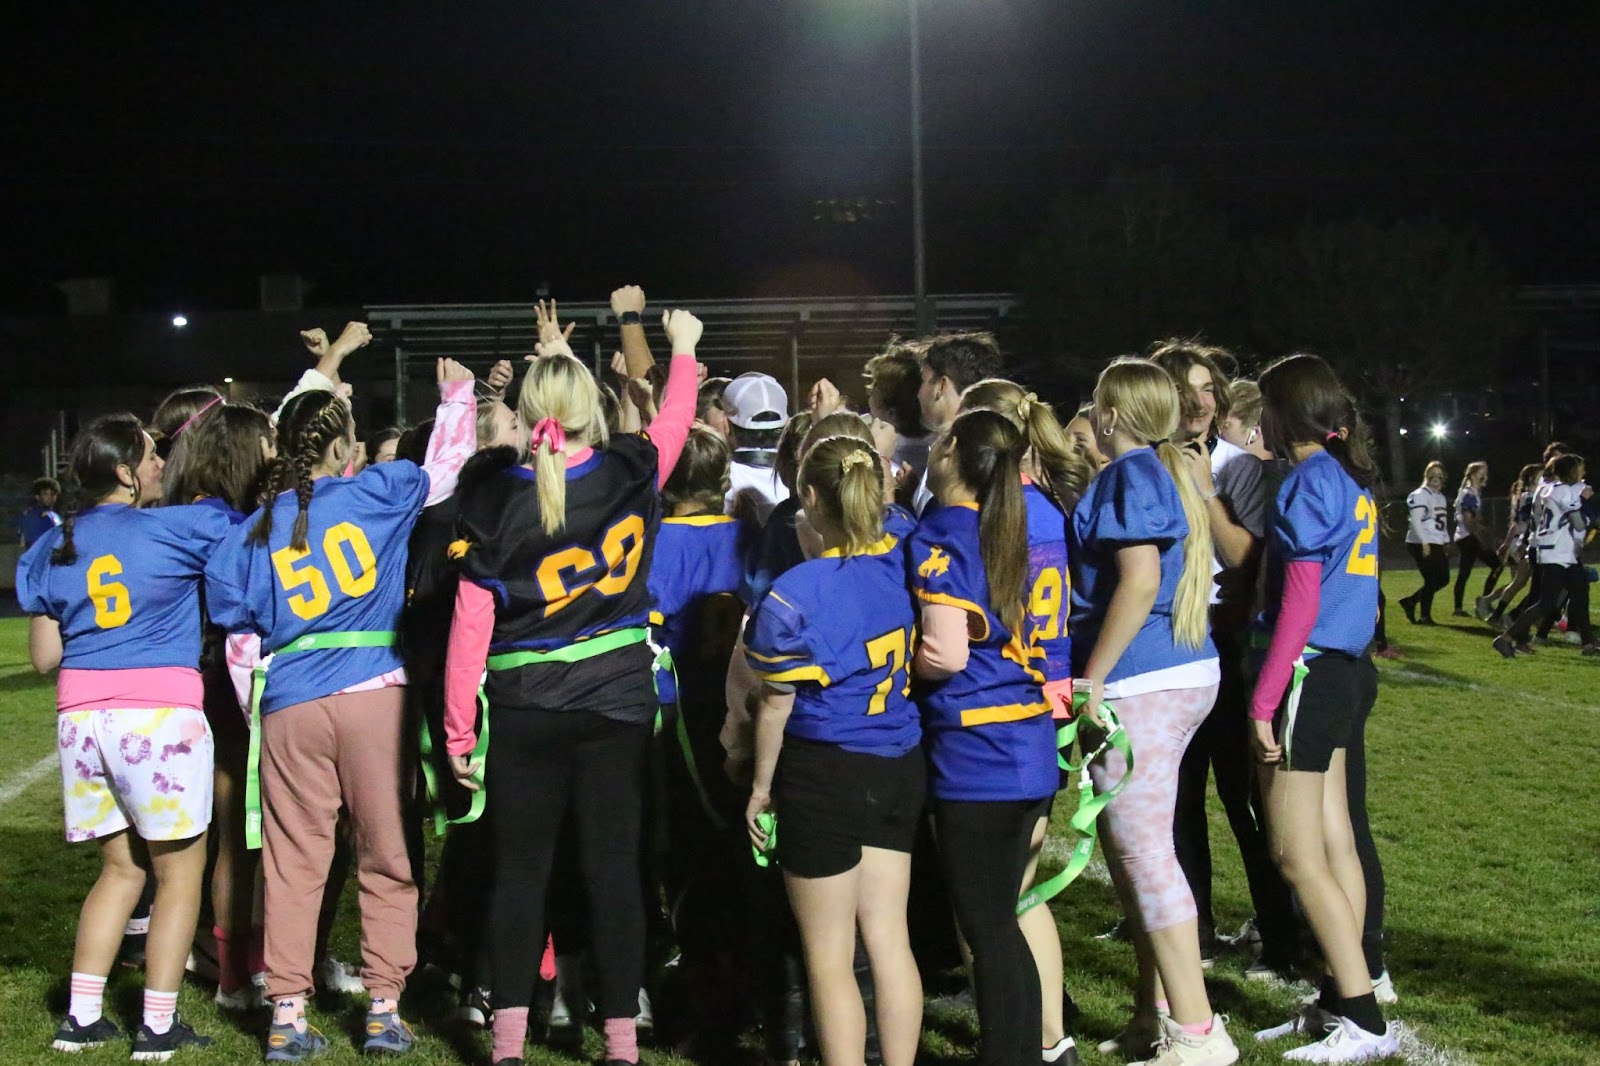 Freshmen and seniors stand together before going out onto the field to play a game of Powderpuff football. /Jovi Anderson • The Brand